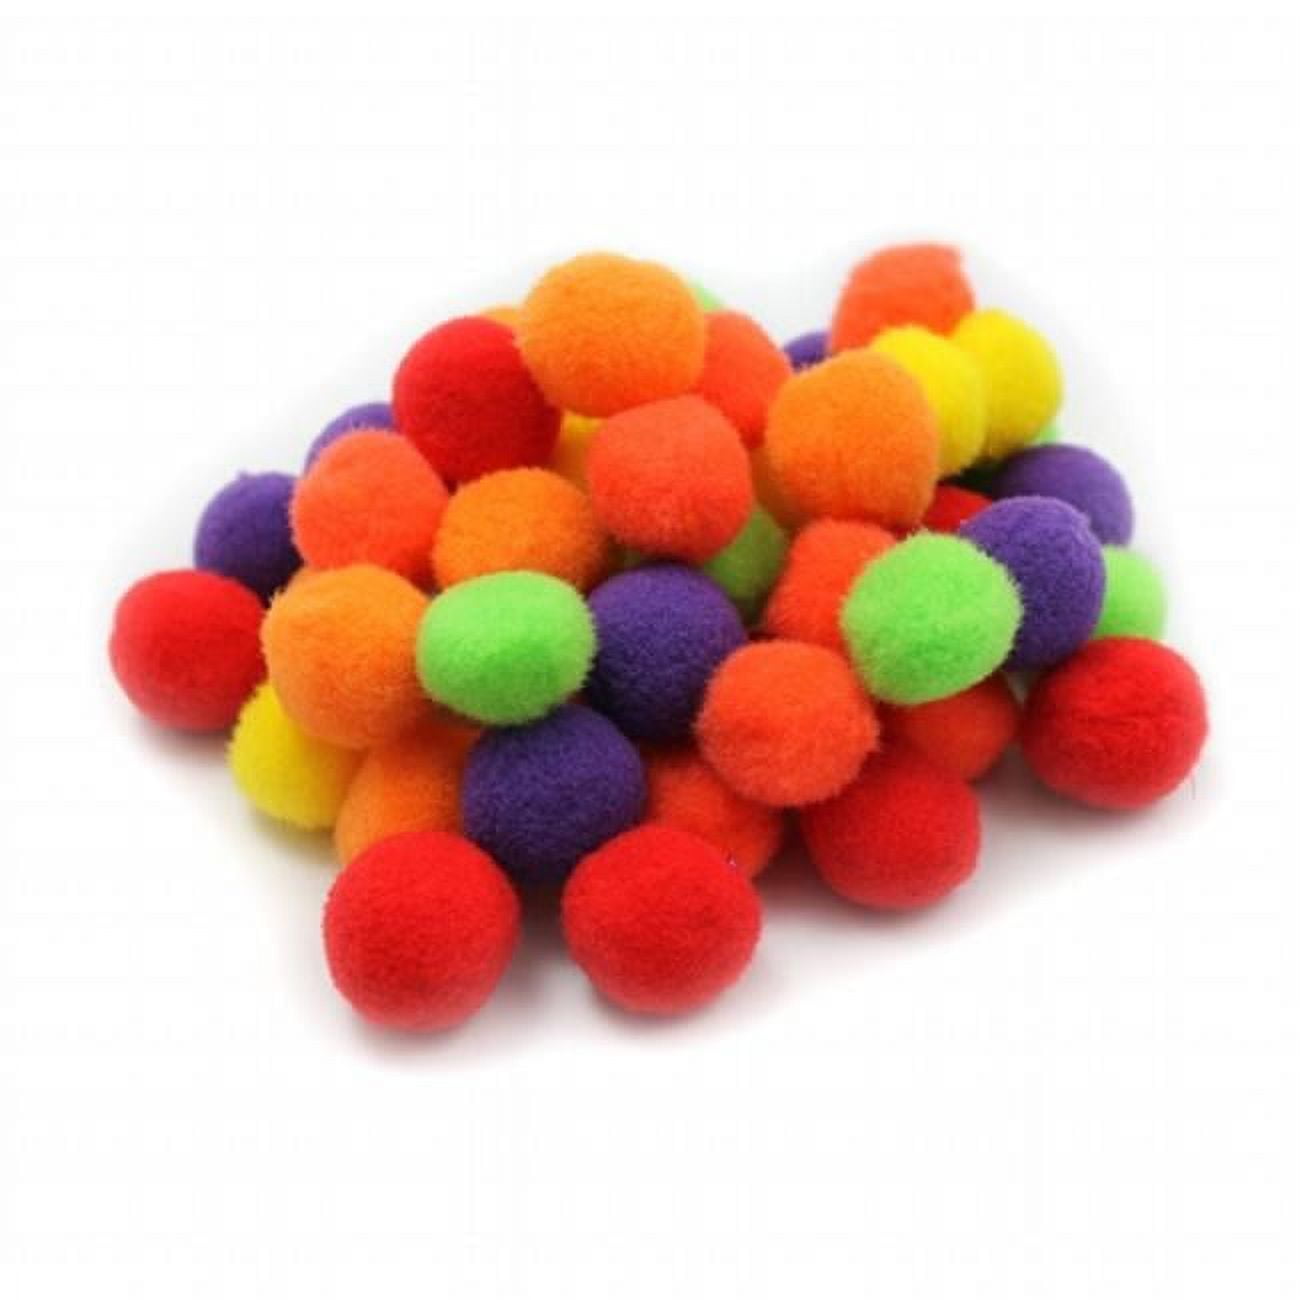 Adeweave 1 inch 300 Pom Poms - Multicolor Pompoms for Crafts in Assorted Colors Soft and Fluffy Large Pom Poms for Crafts in Reusable Zipper Bag